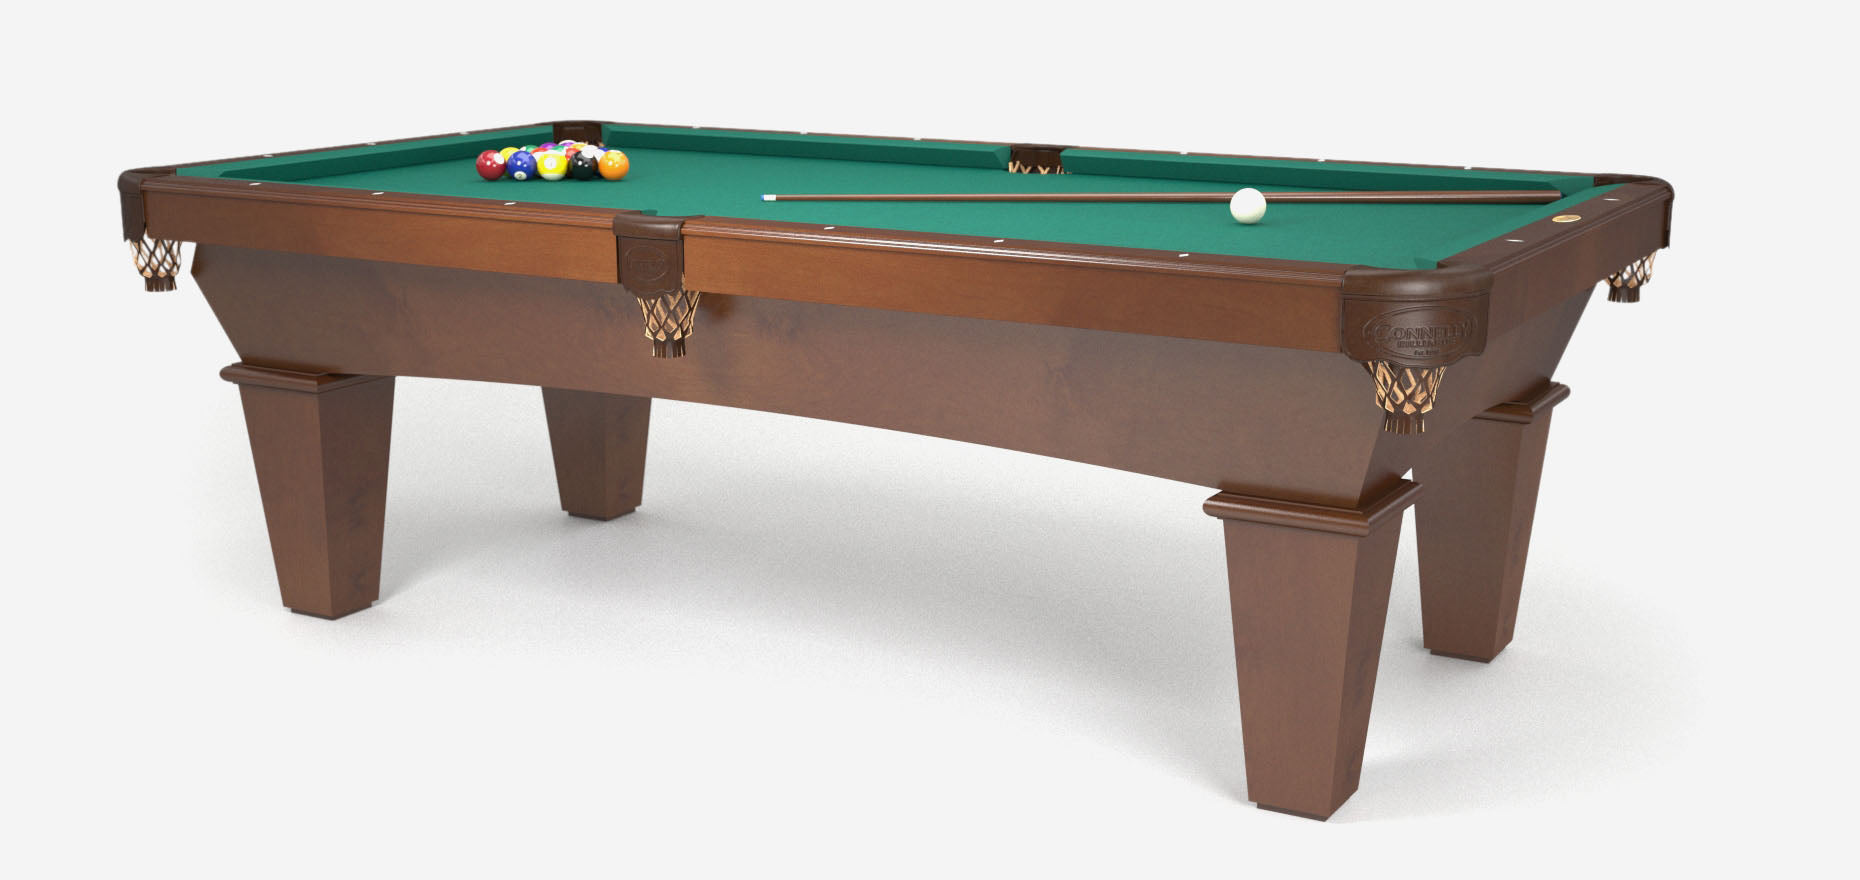 Global Billiard Coin Operated Pool Table - Challenger For Sale